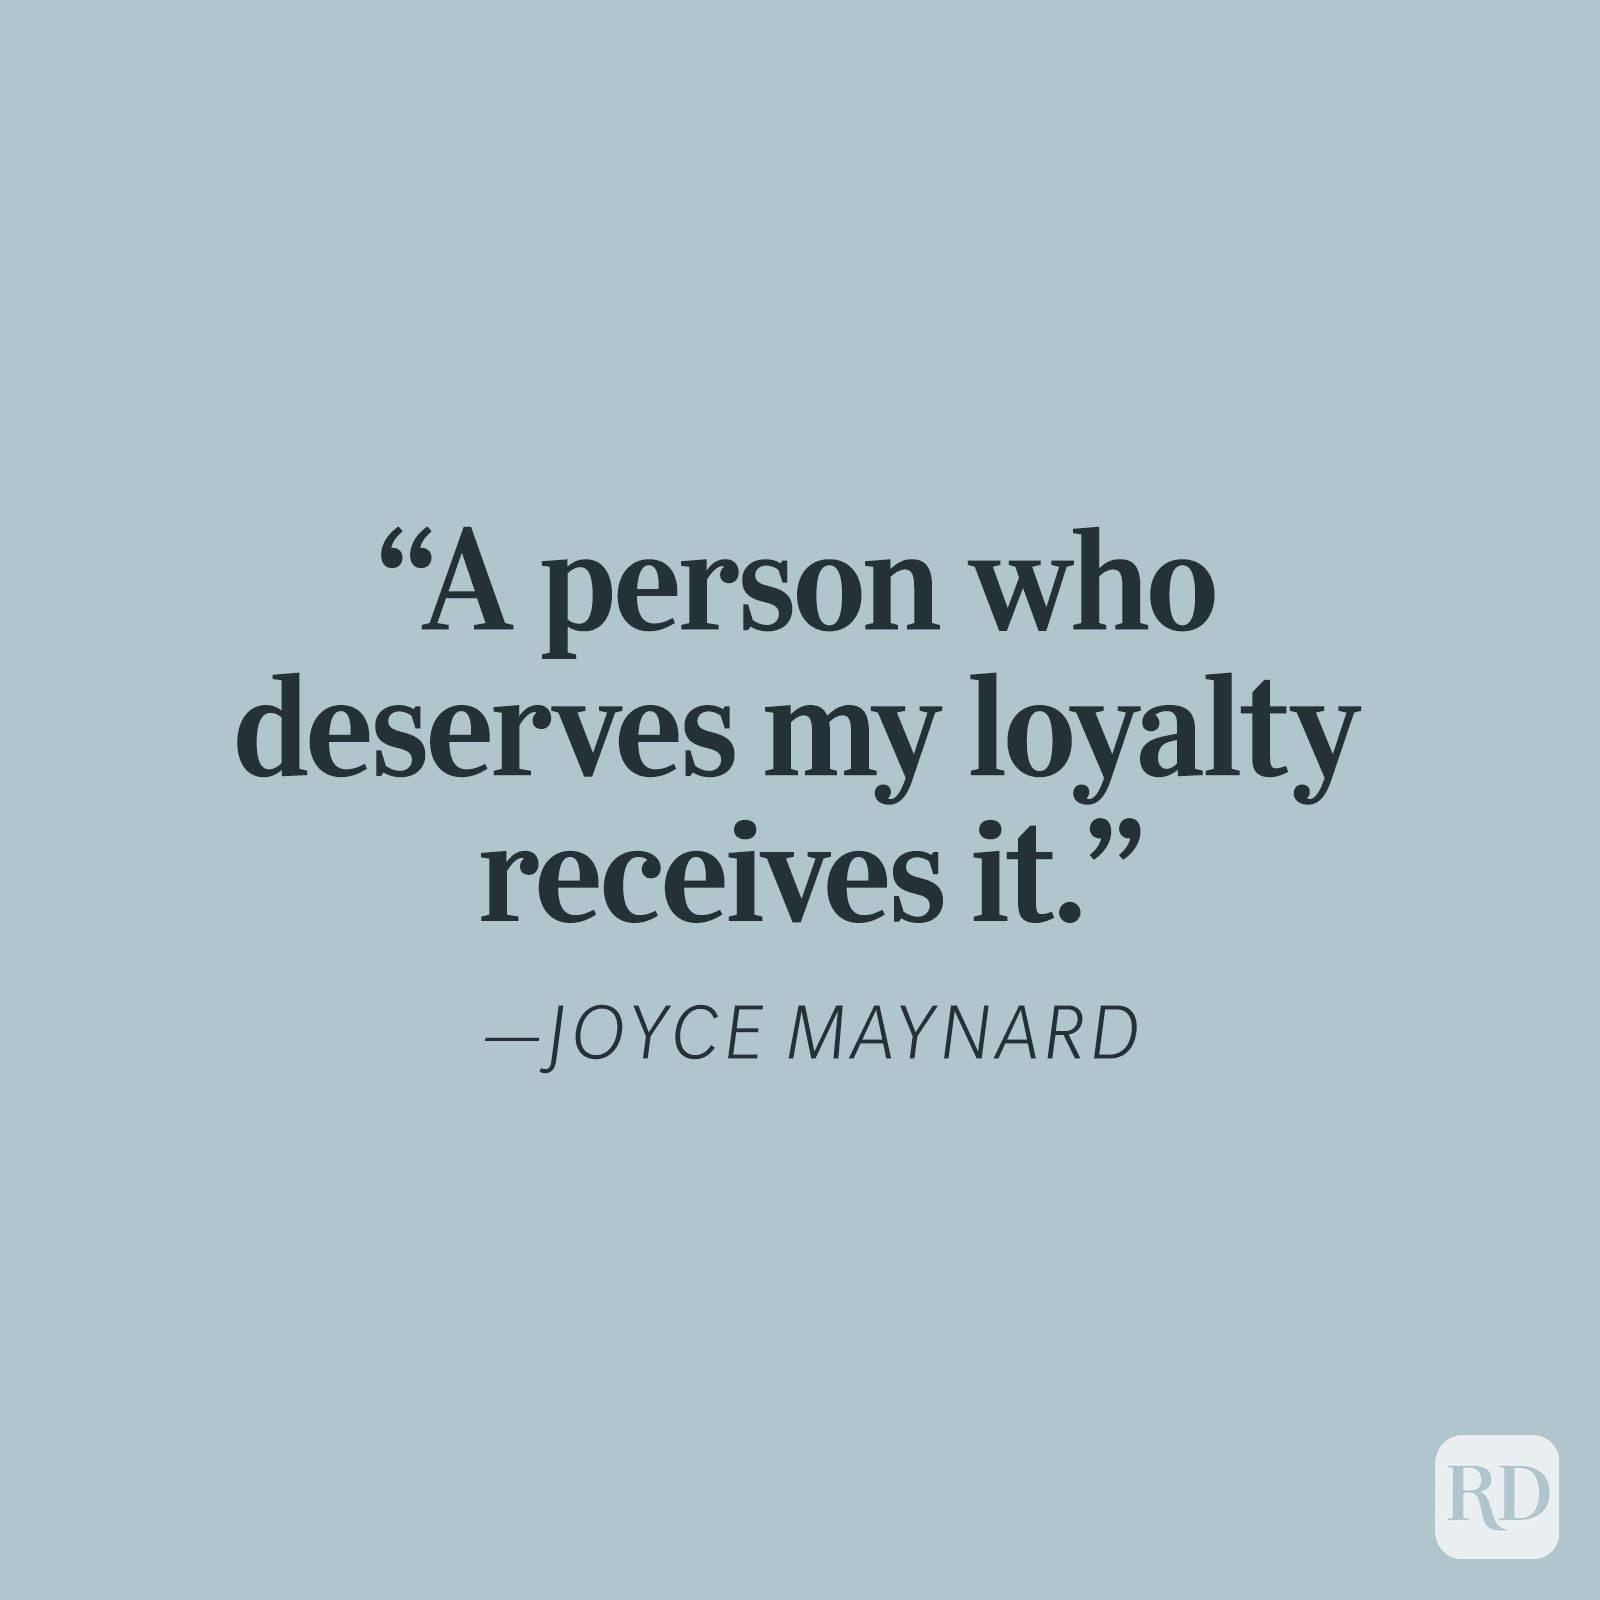 96 Best Loyalty Quotes: Thoughtful and Meaningful Sayings